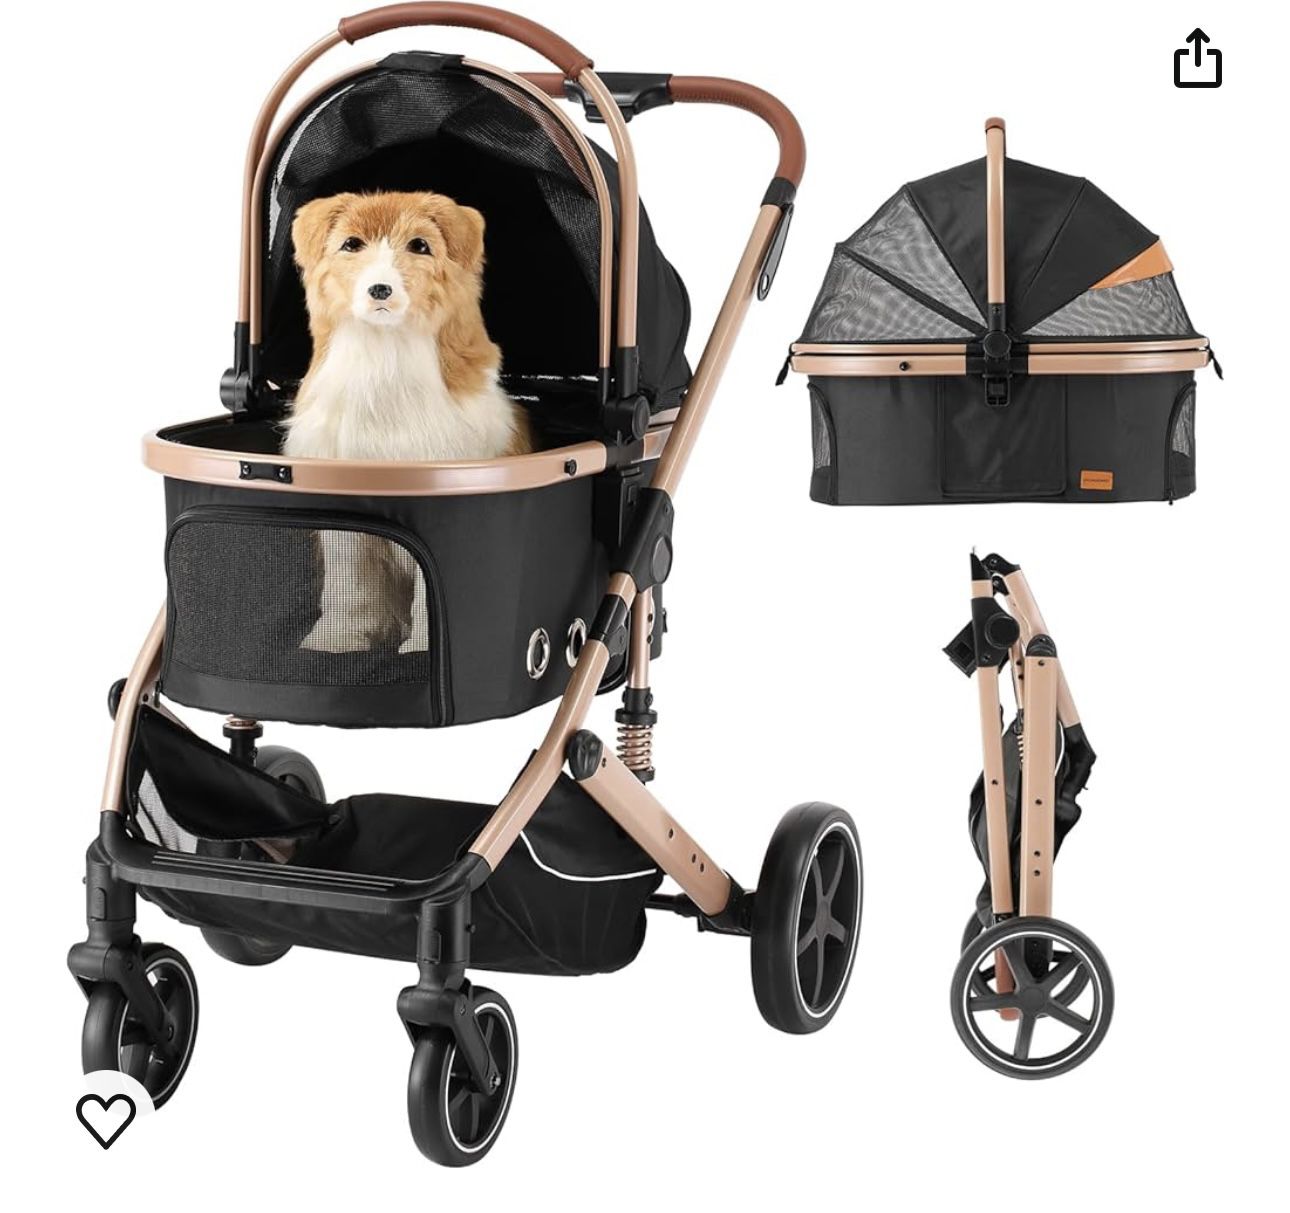 Luxury Pet Stroller for Small to Medium Dogs